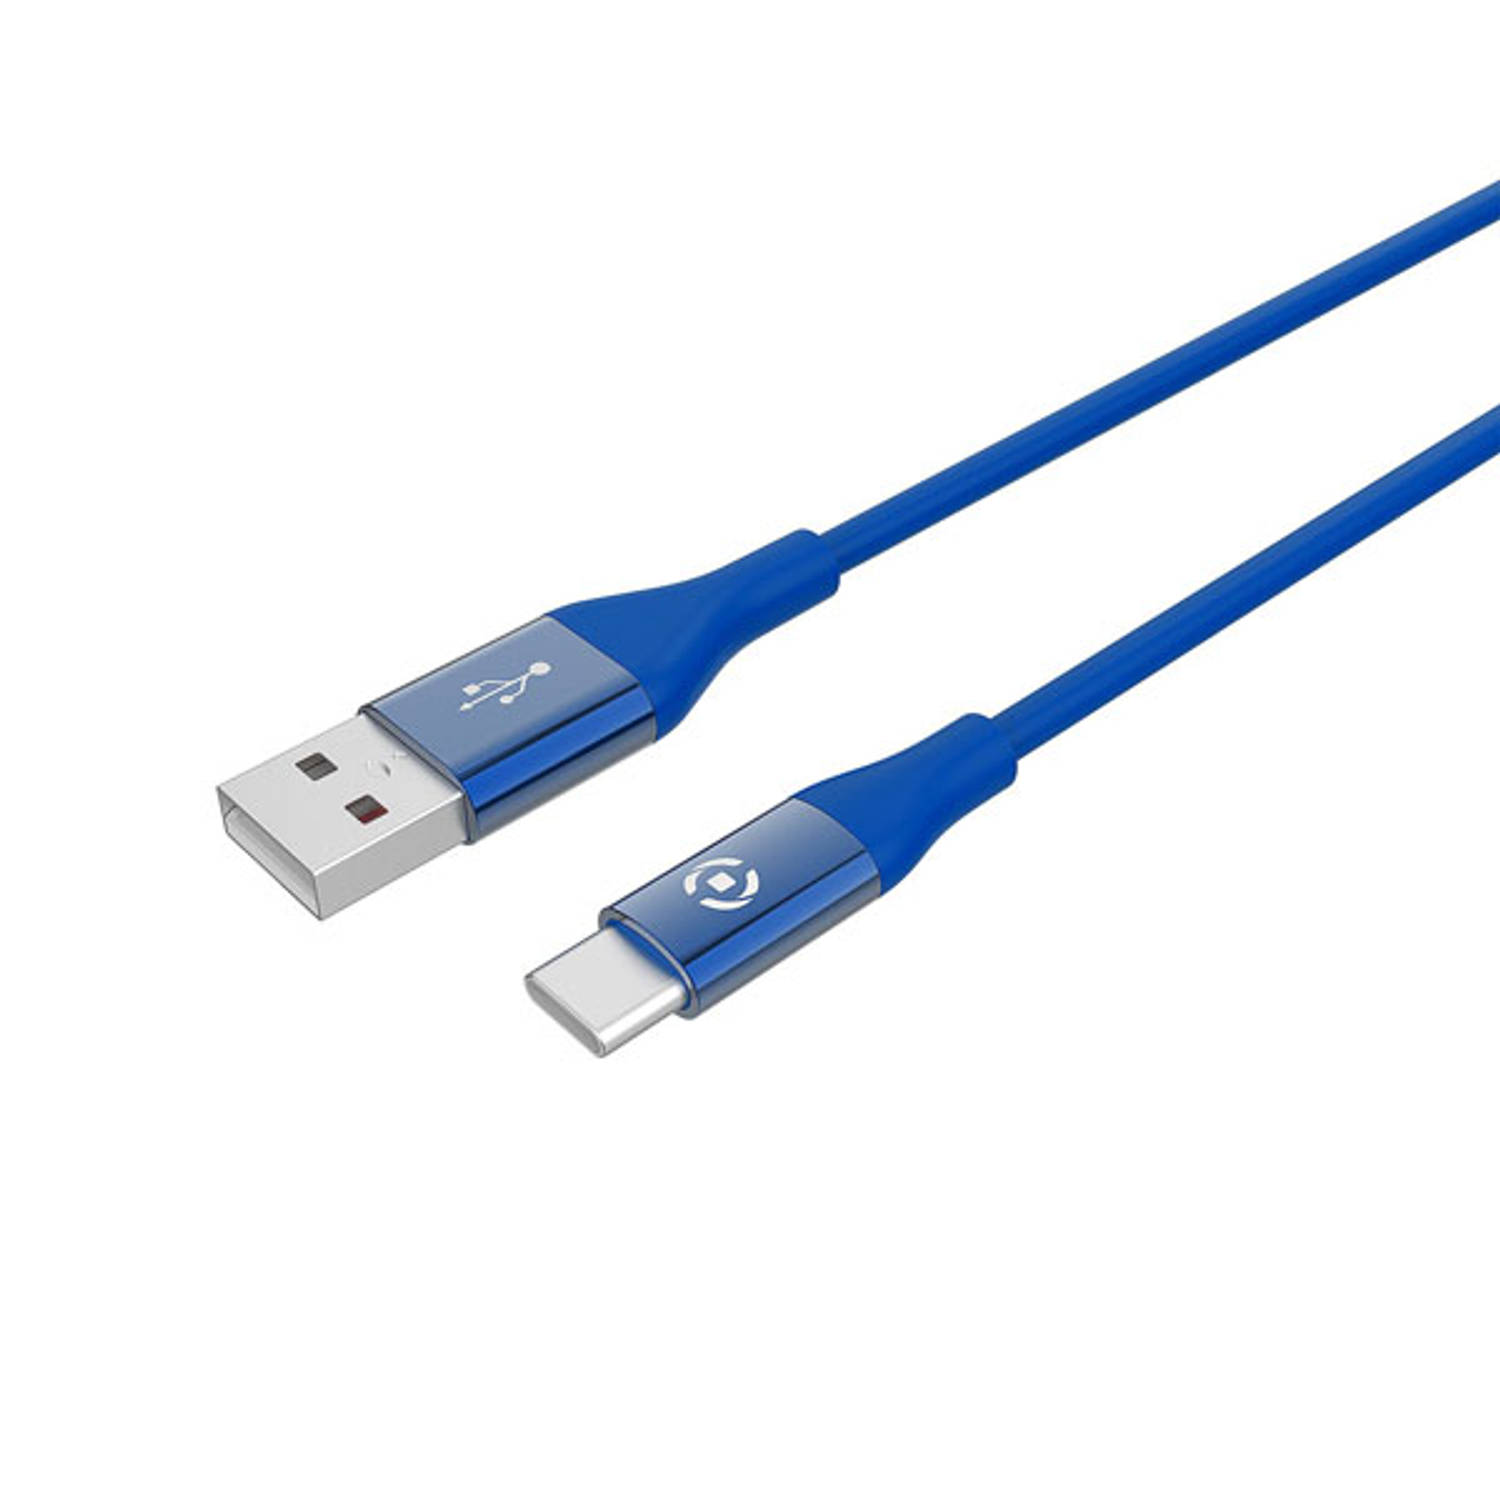 Celly - USB-Kabel Type-C, 1 meter, Blauw - Siliconen - Celly Feeling